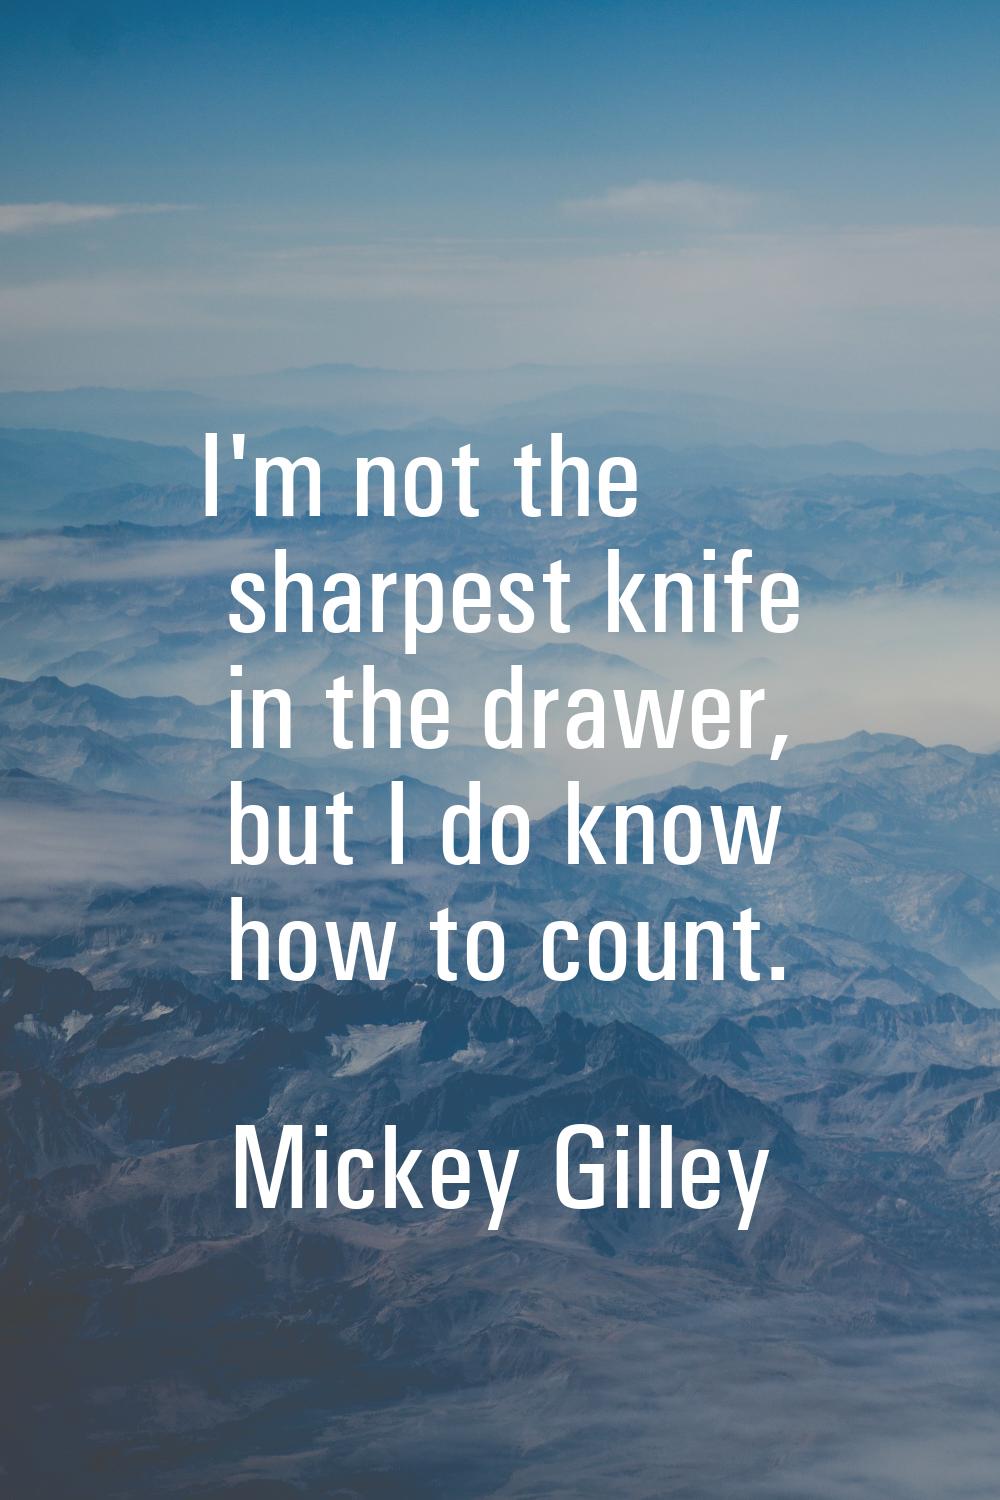 I'm not the sharpest knife in the drawer, but I do know how to count.